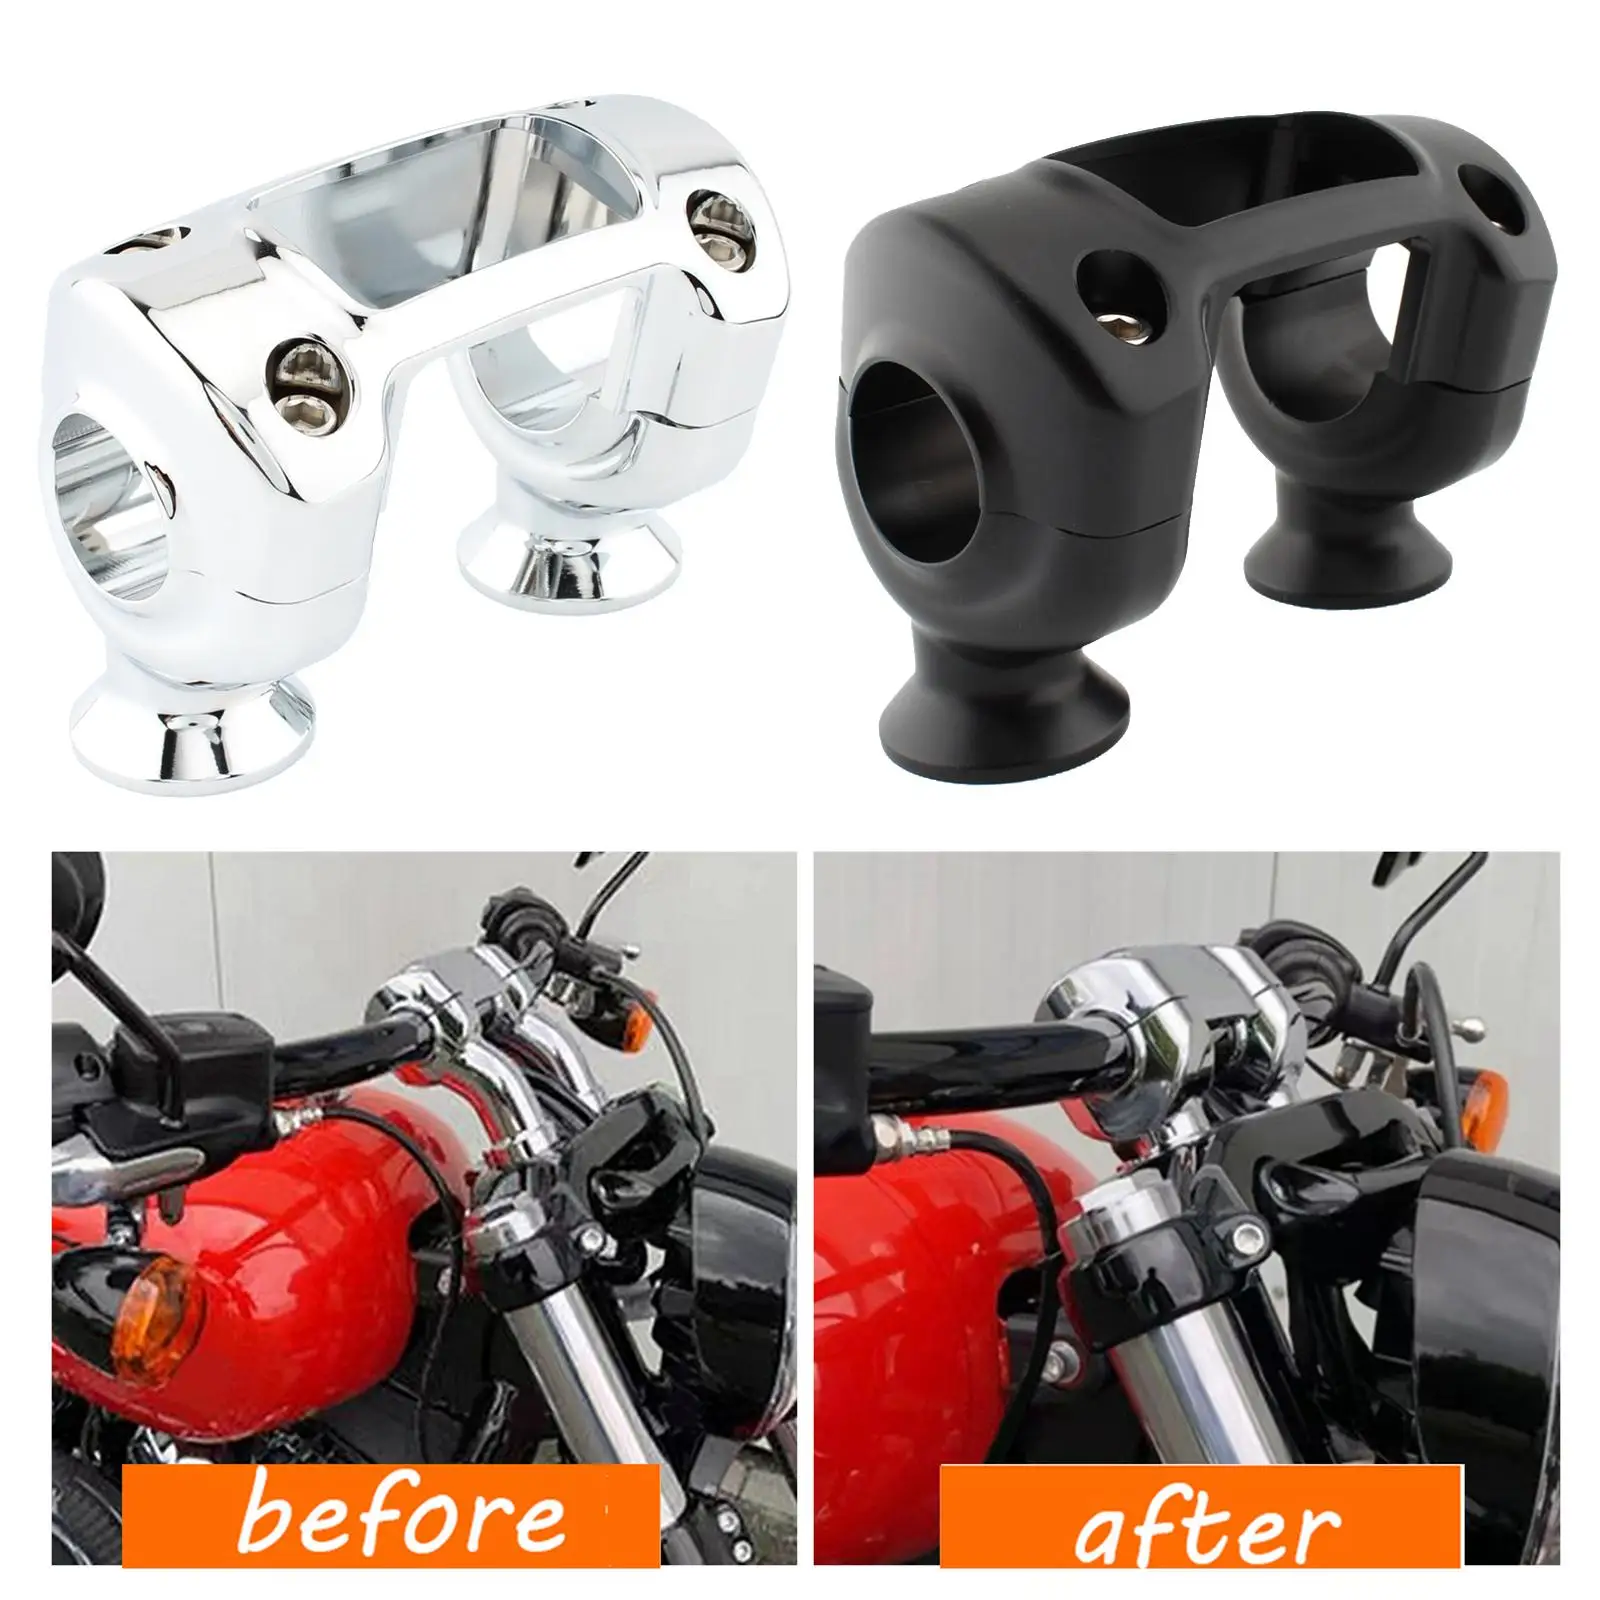 Handlebar Riser Clamp Spare Parts Replaces Sturdy for Cvo Fxdfse 2009